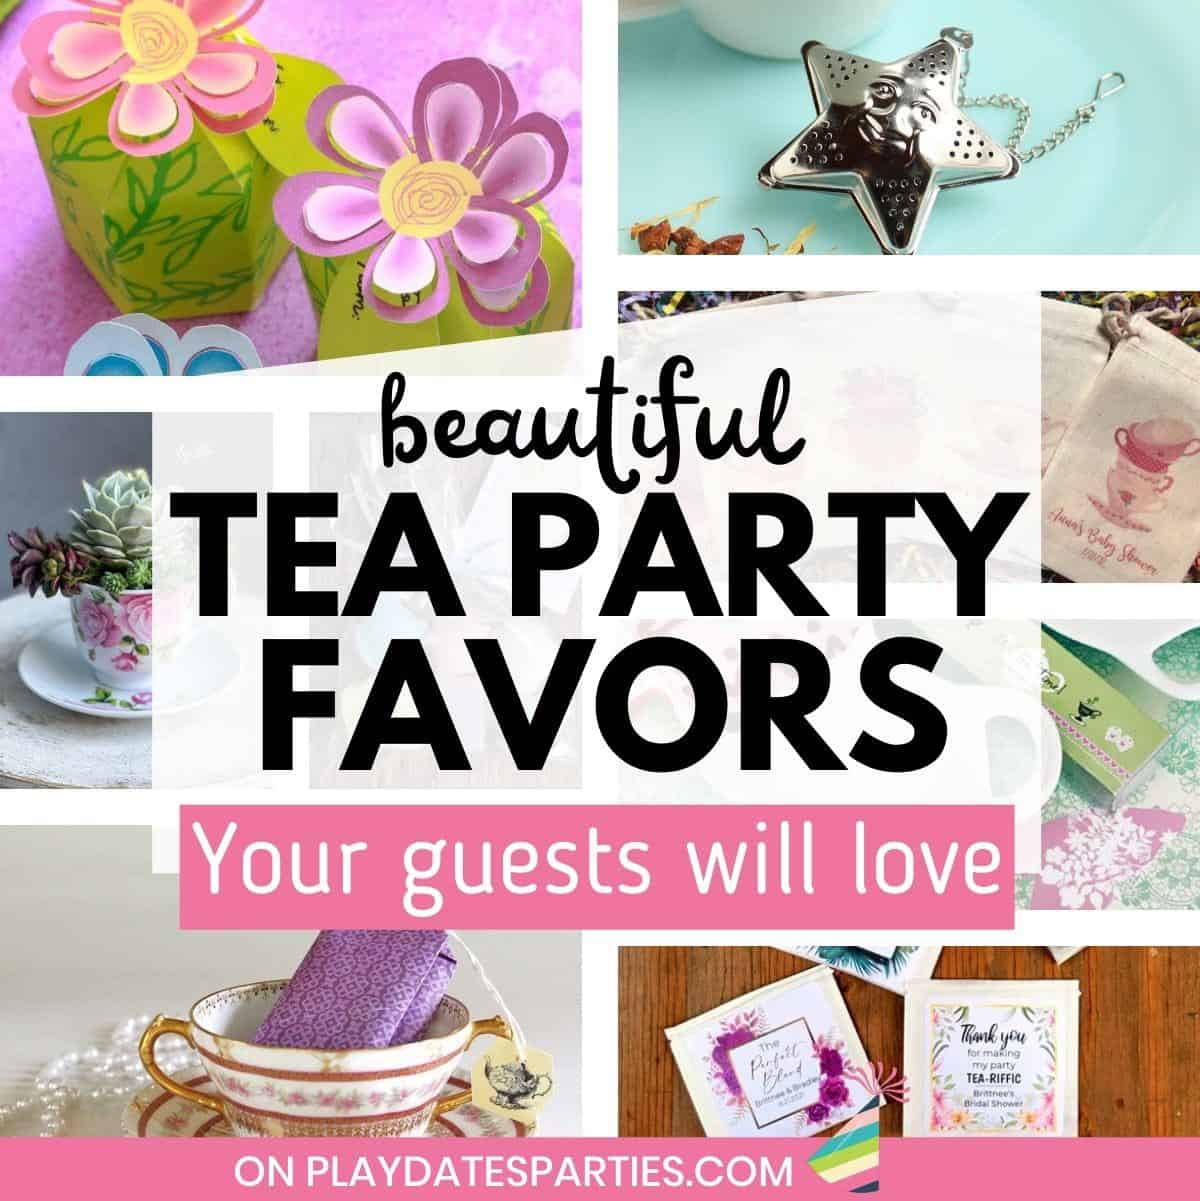 Collage of party favors with text overlay beautiful tea party favors your guests will love.